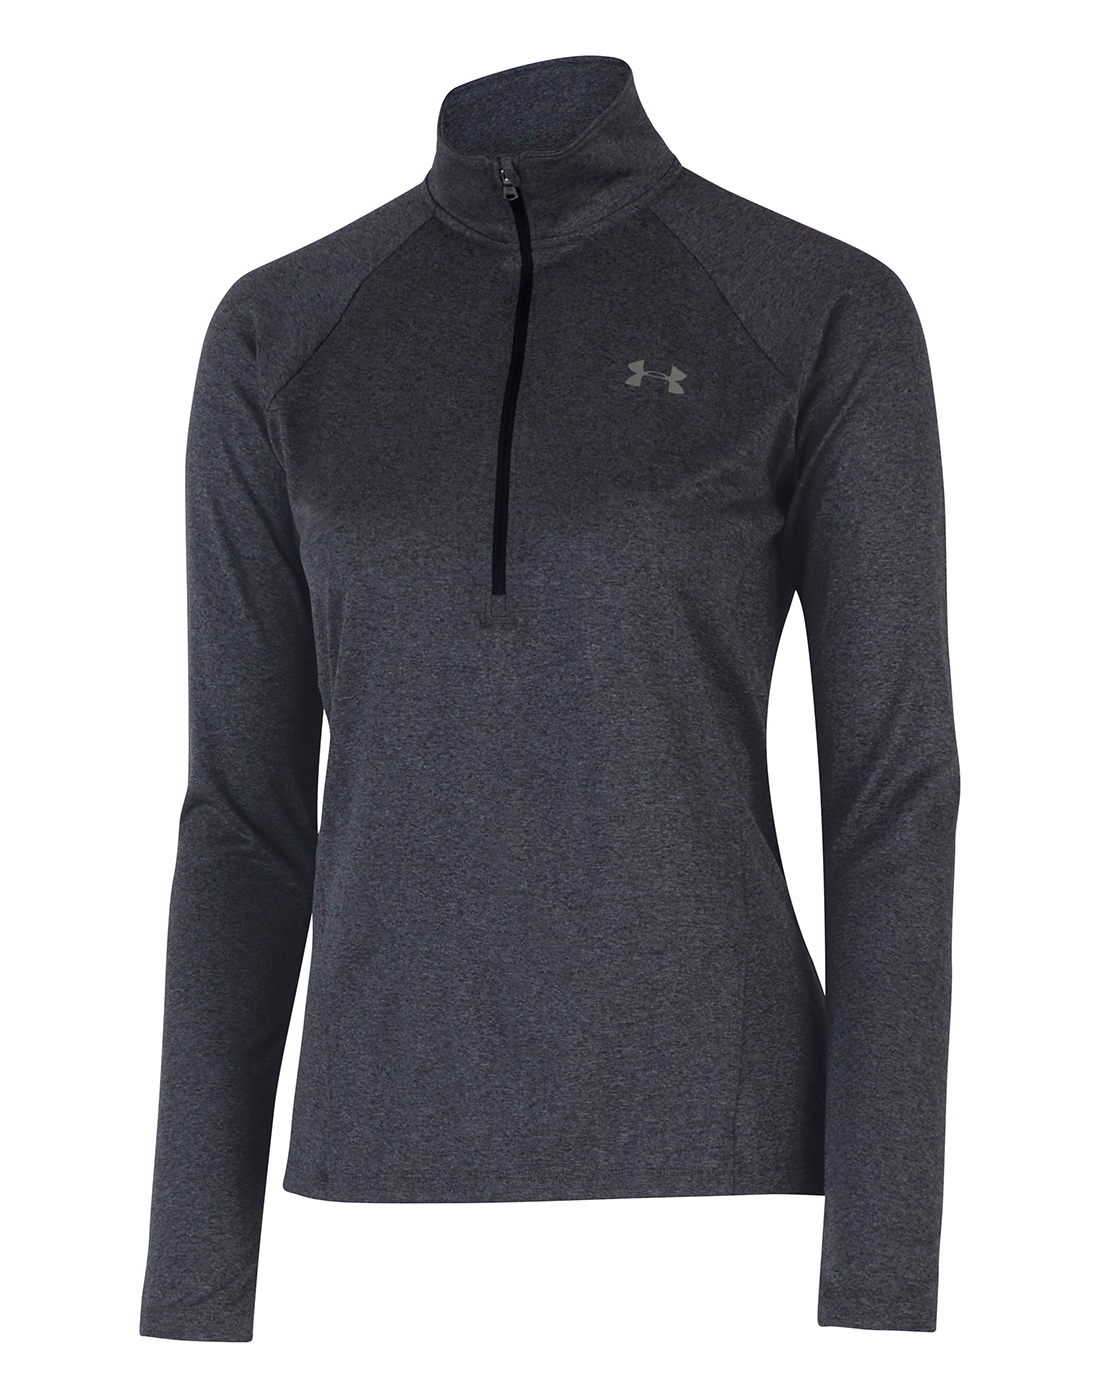 Under Armour WOMENS TECH HALF ZIP TOP - Grey | Life Style Sports IE